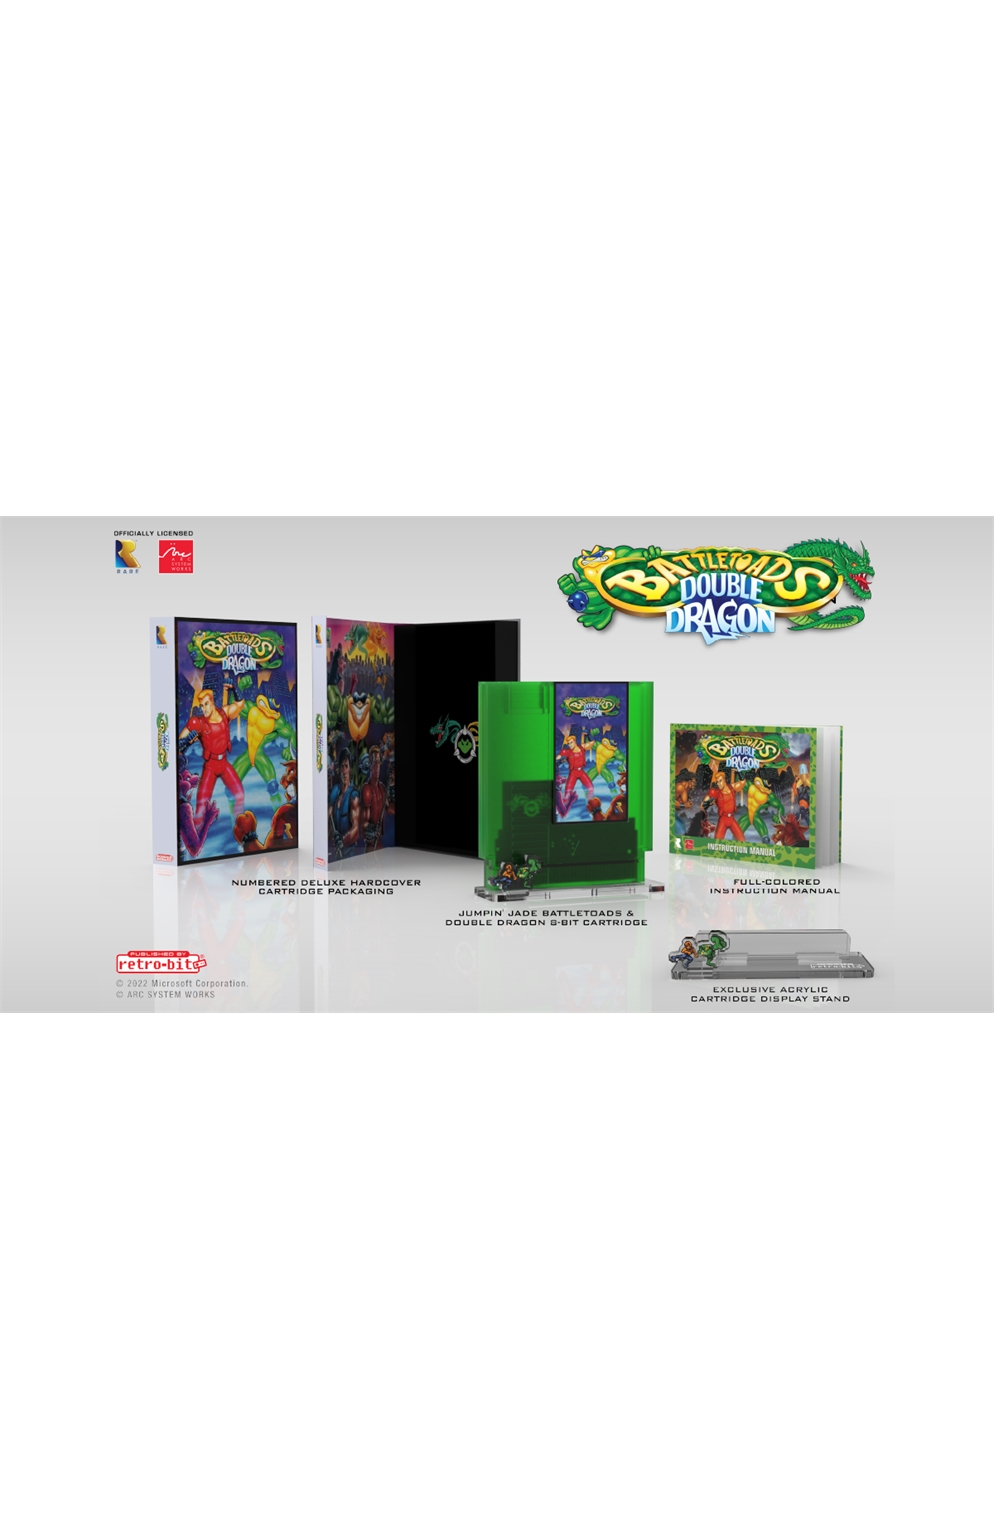 Retro-Bit Battletoads And Double Dragon Collector's Cartridge For Snes